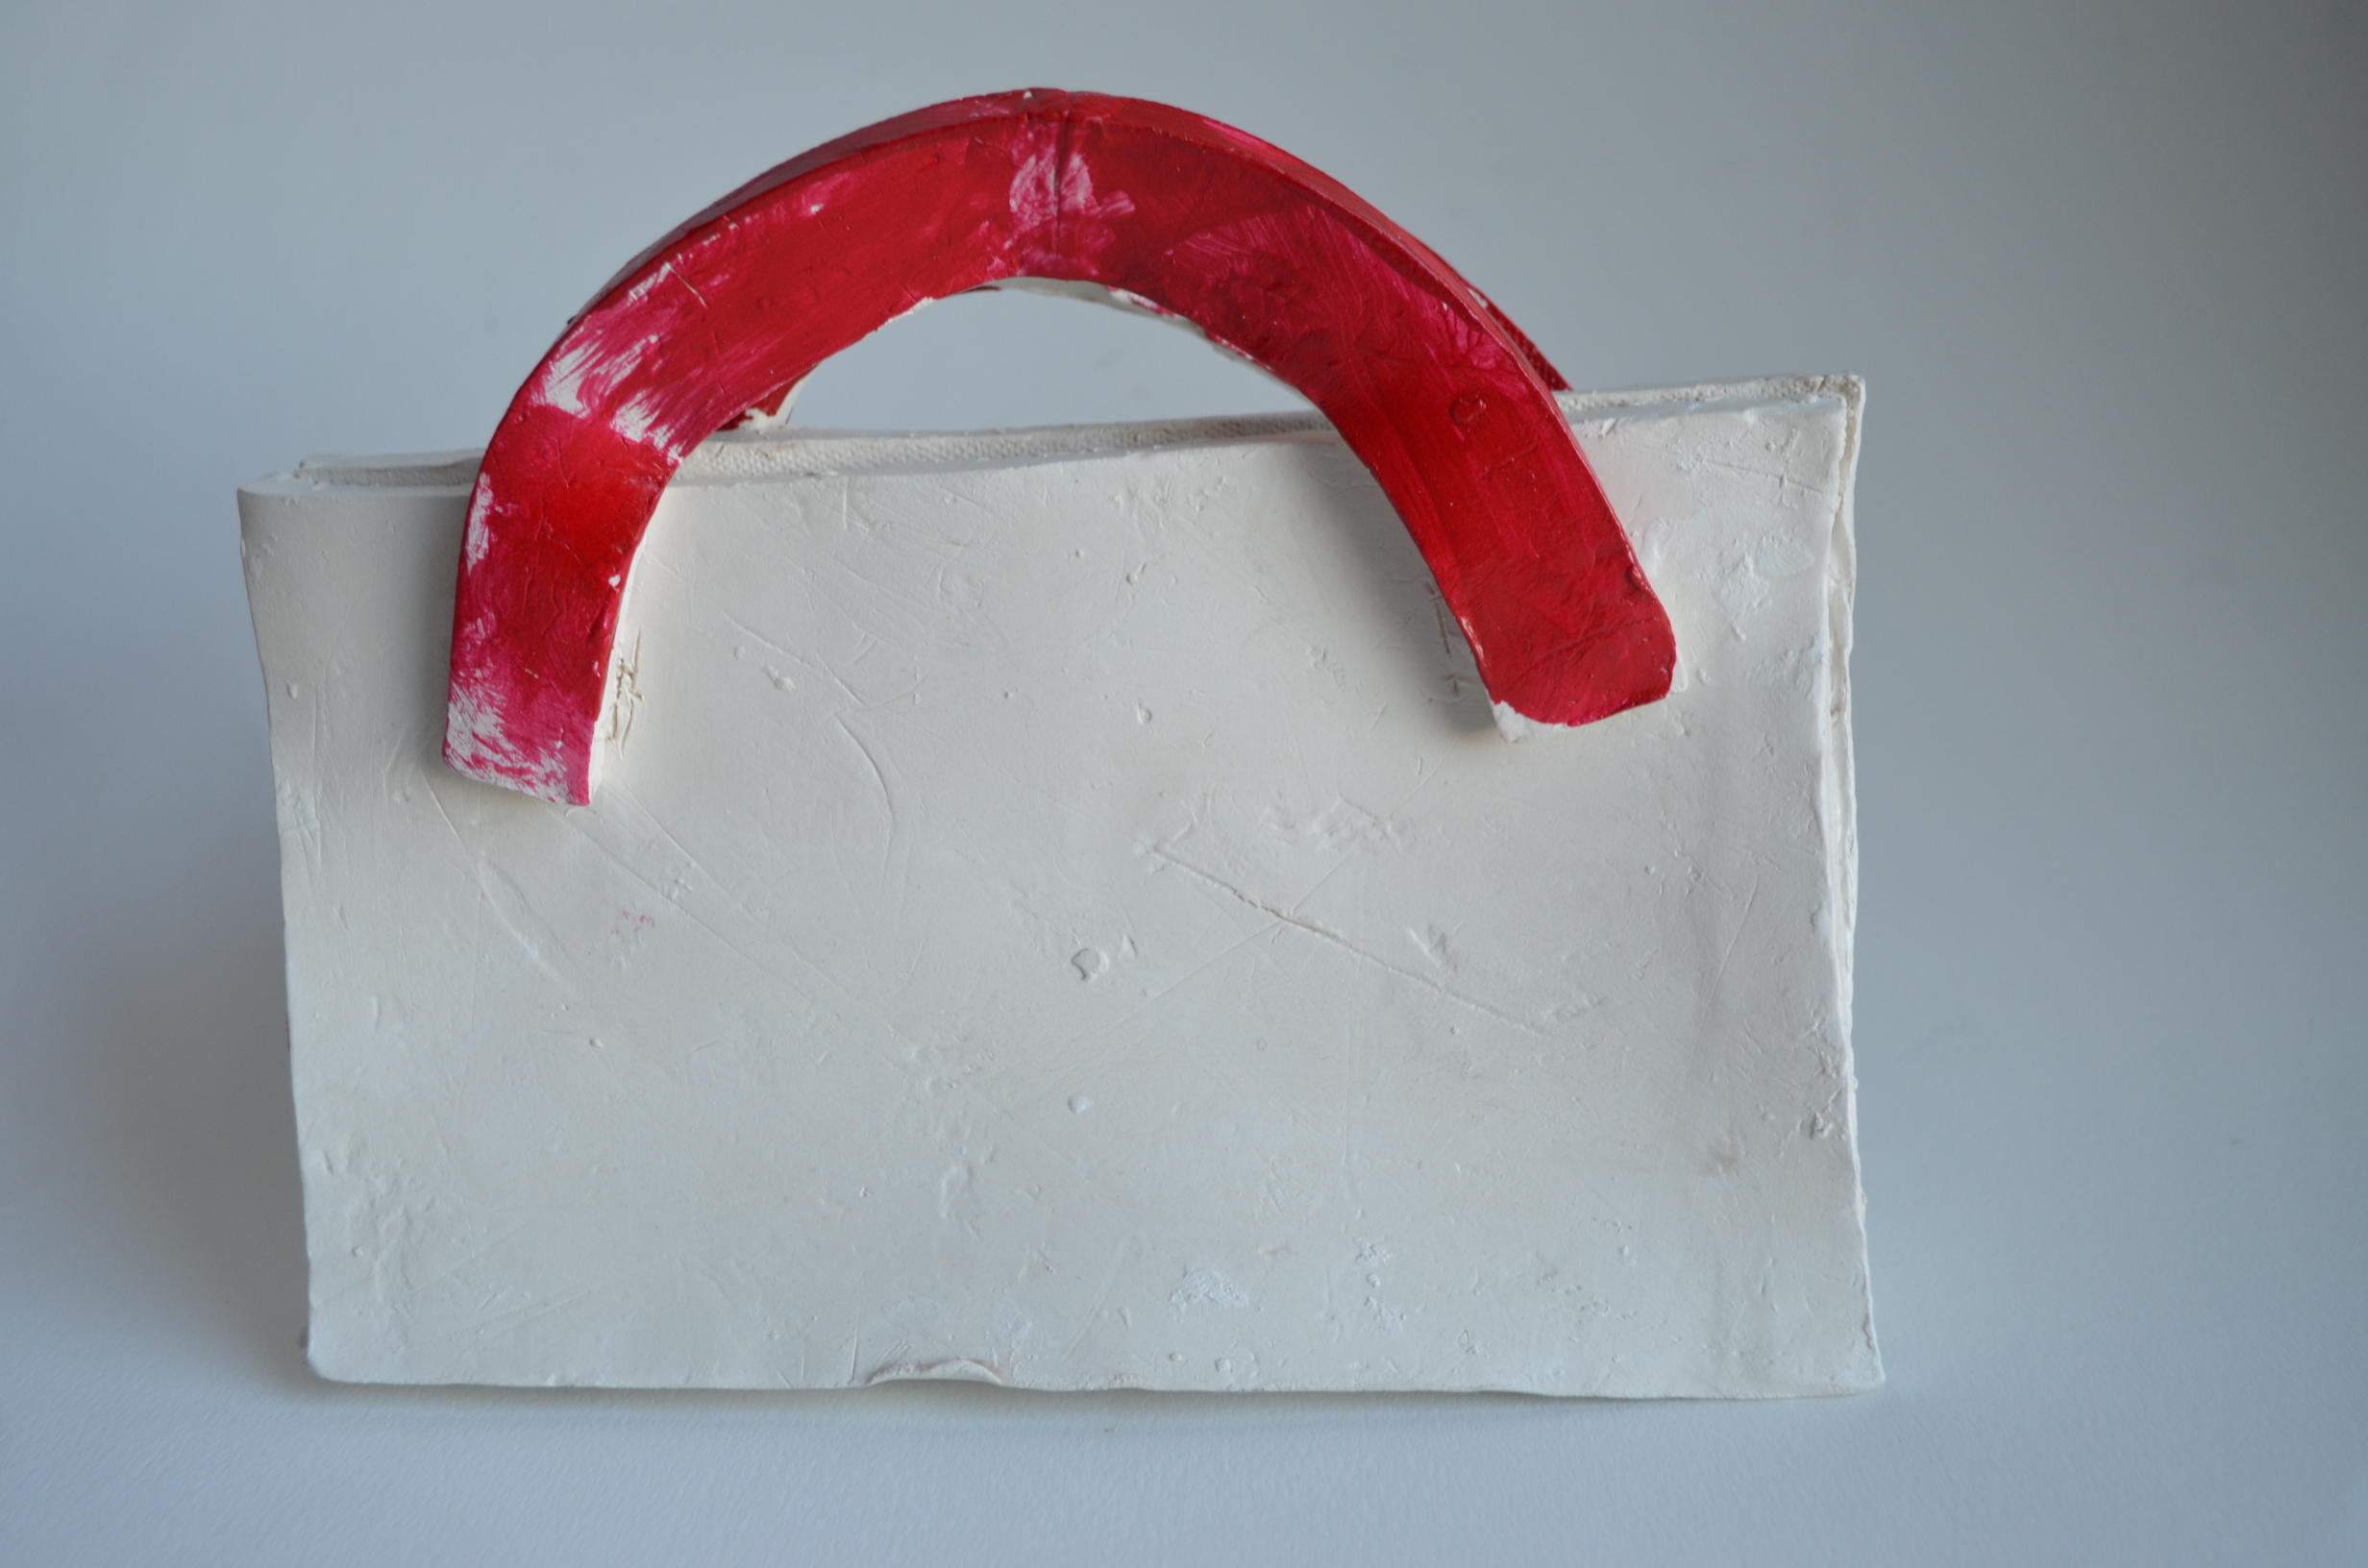 Purse sculpture by Molly Piper